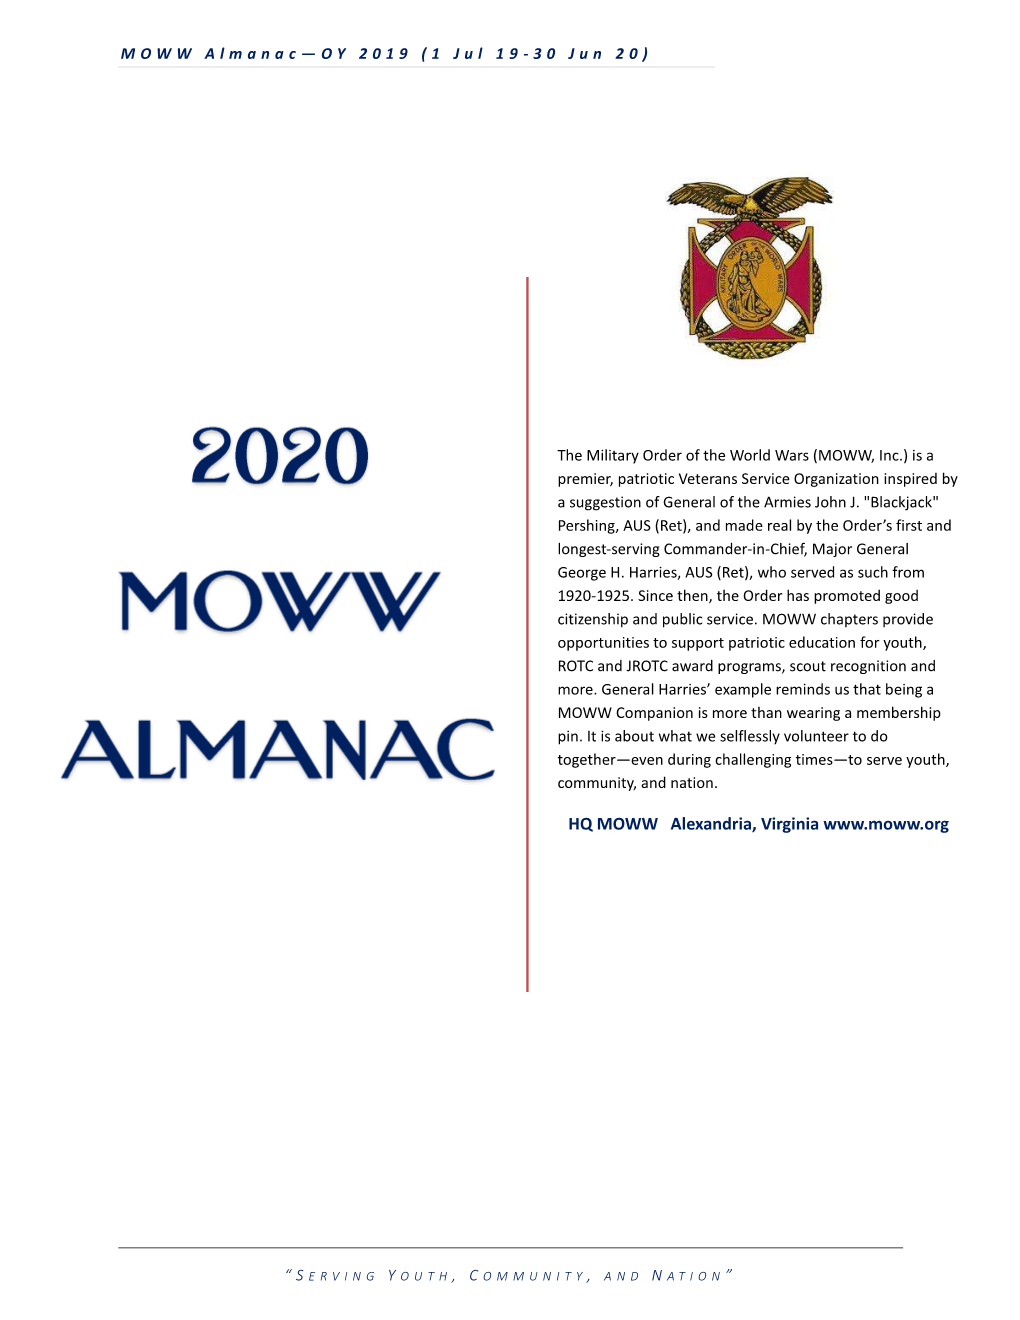 2020 MOWW Almanac for Reference